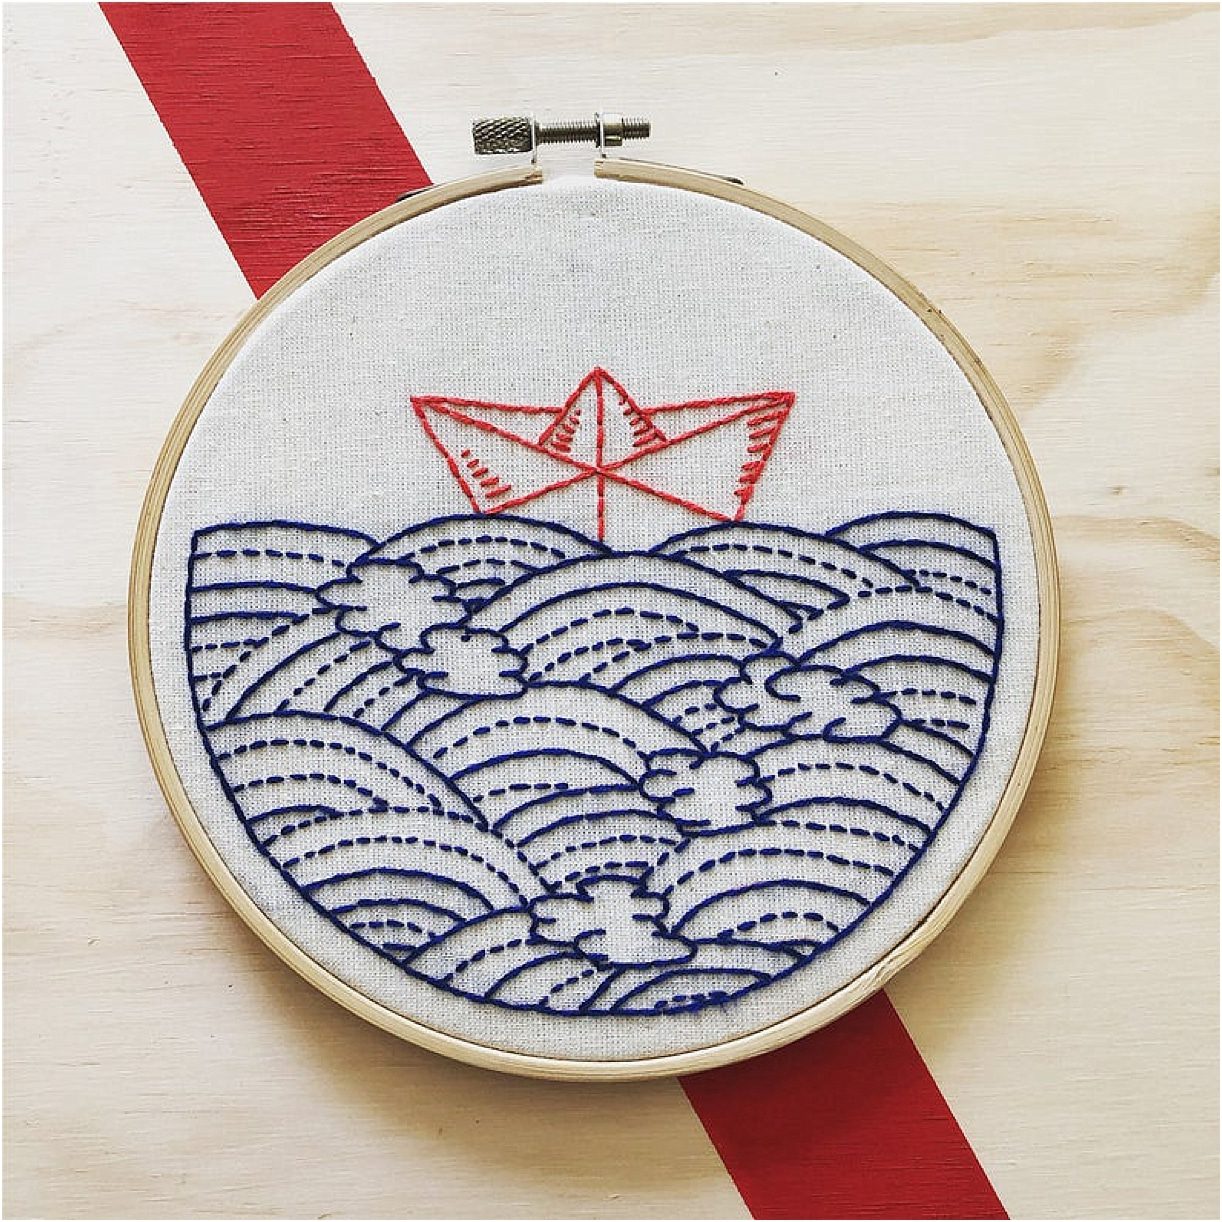 12 DIY Embroidery Designs for Your New Home | Hill City Bride Virginia Weddings Nautical Paper Boat